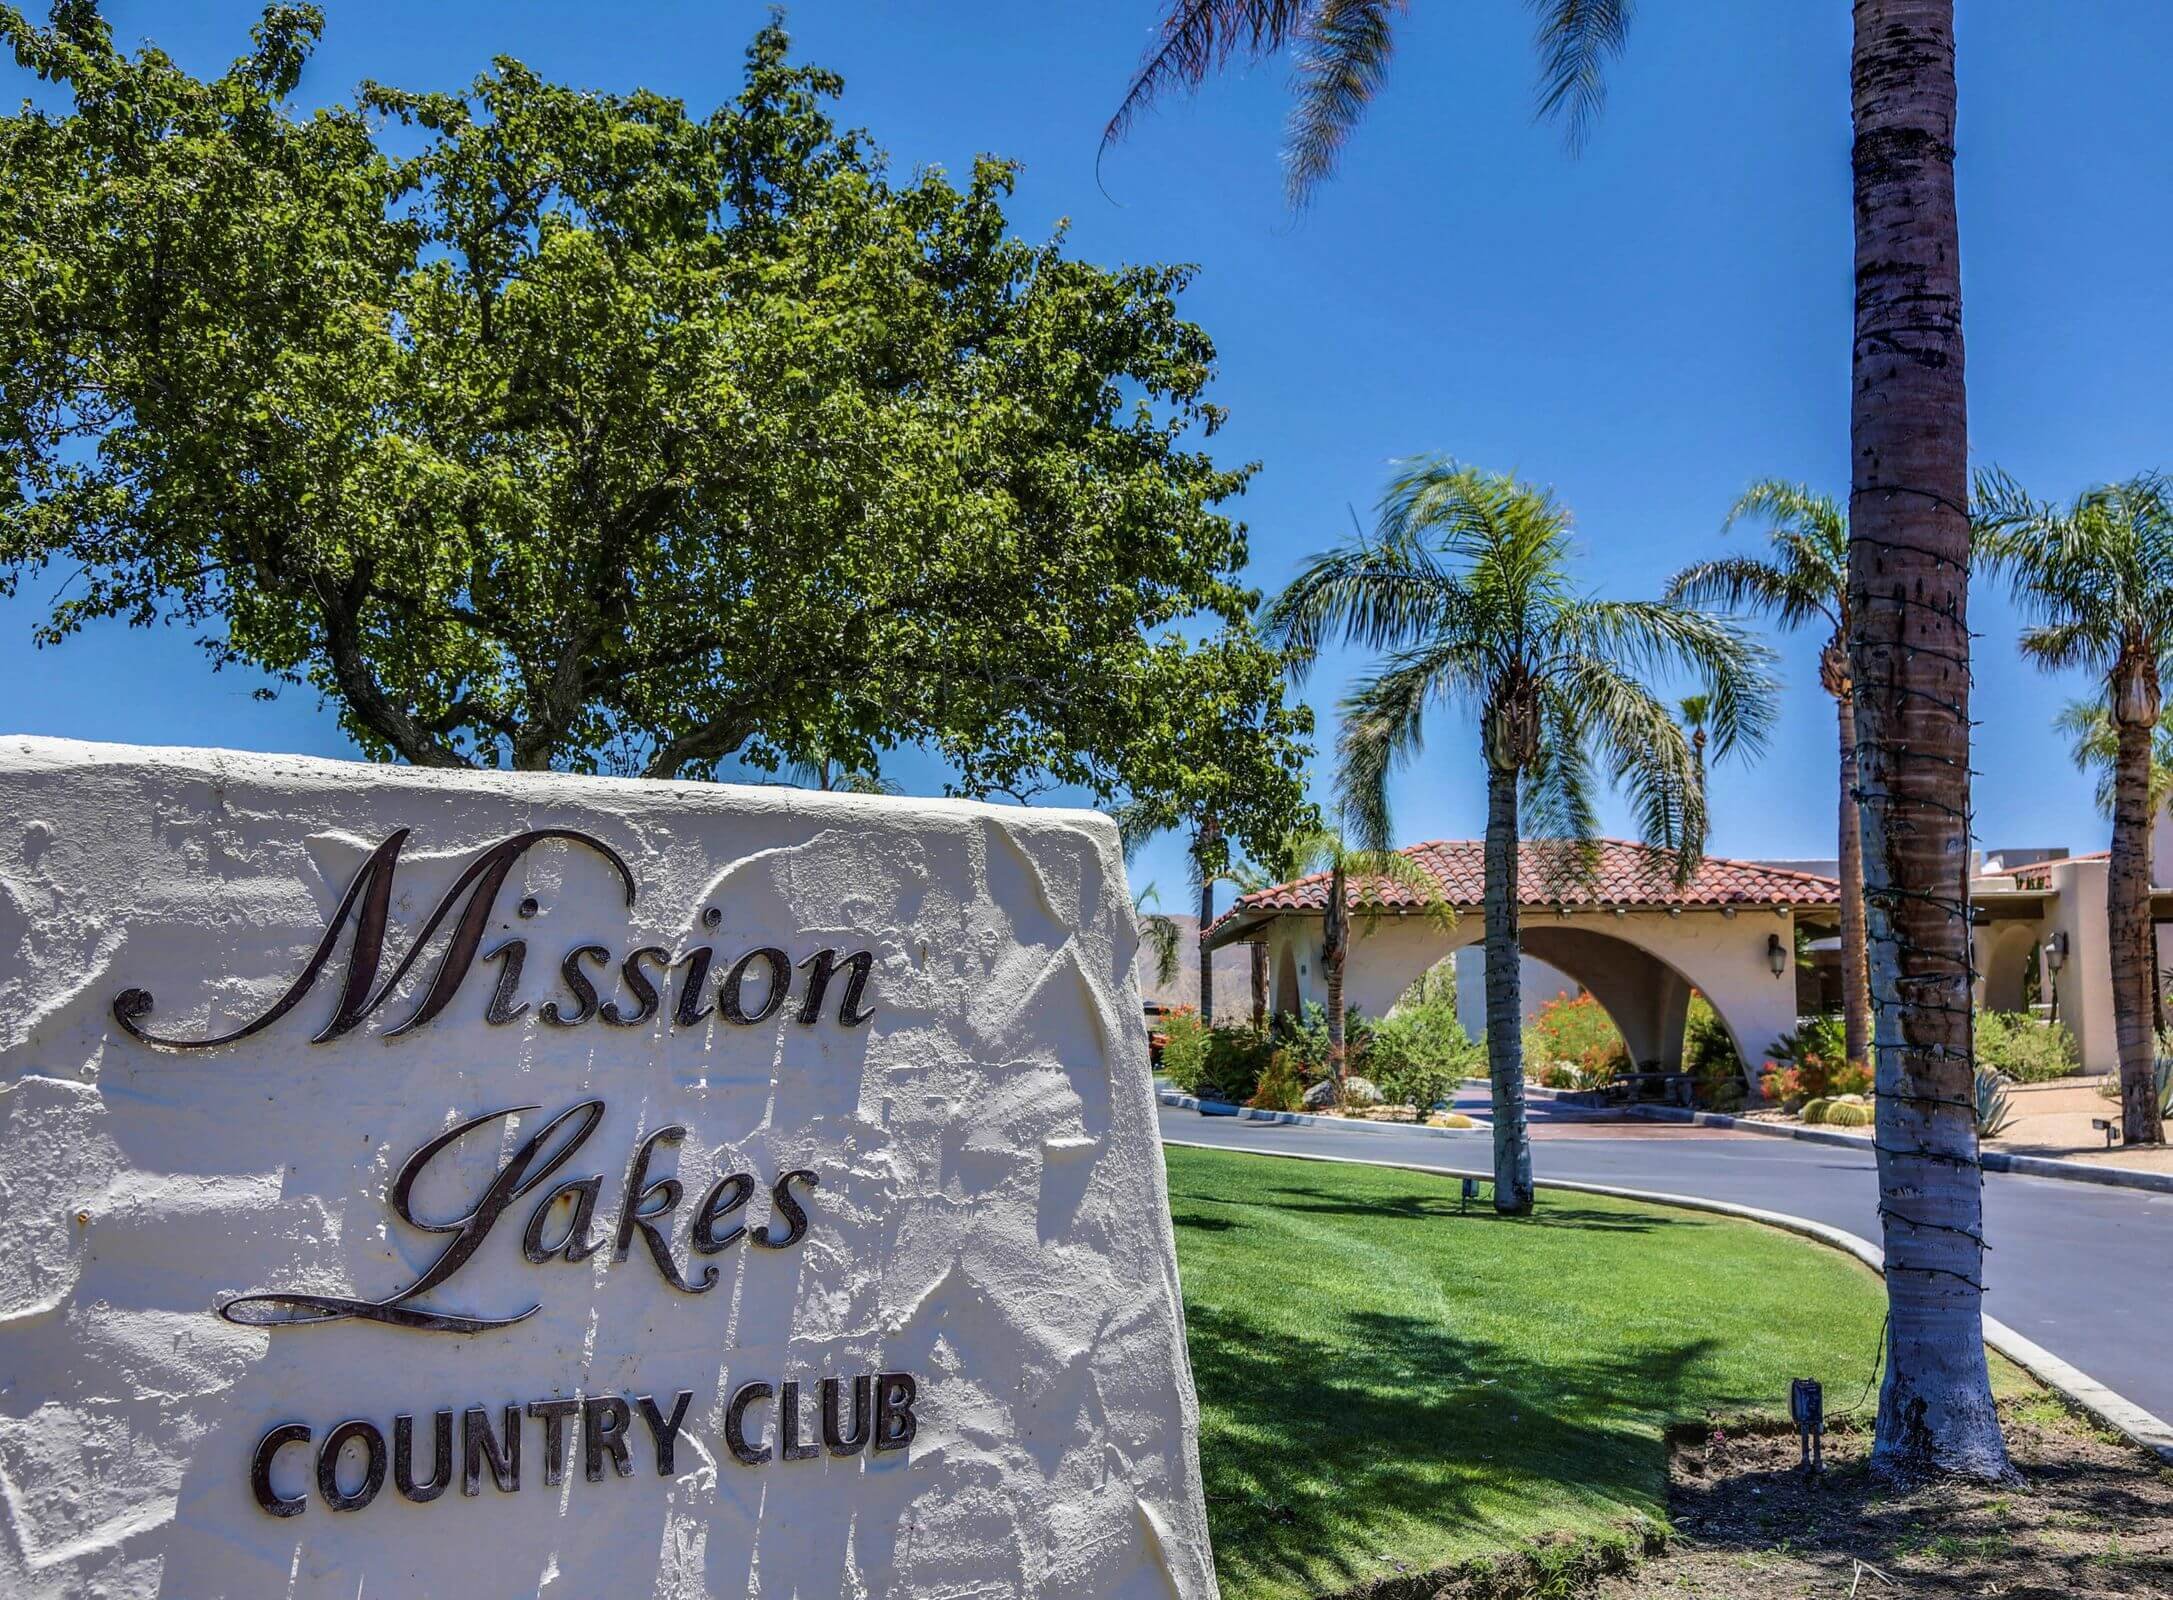 Mission Lakes Country Club Neighborhood